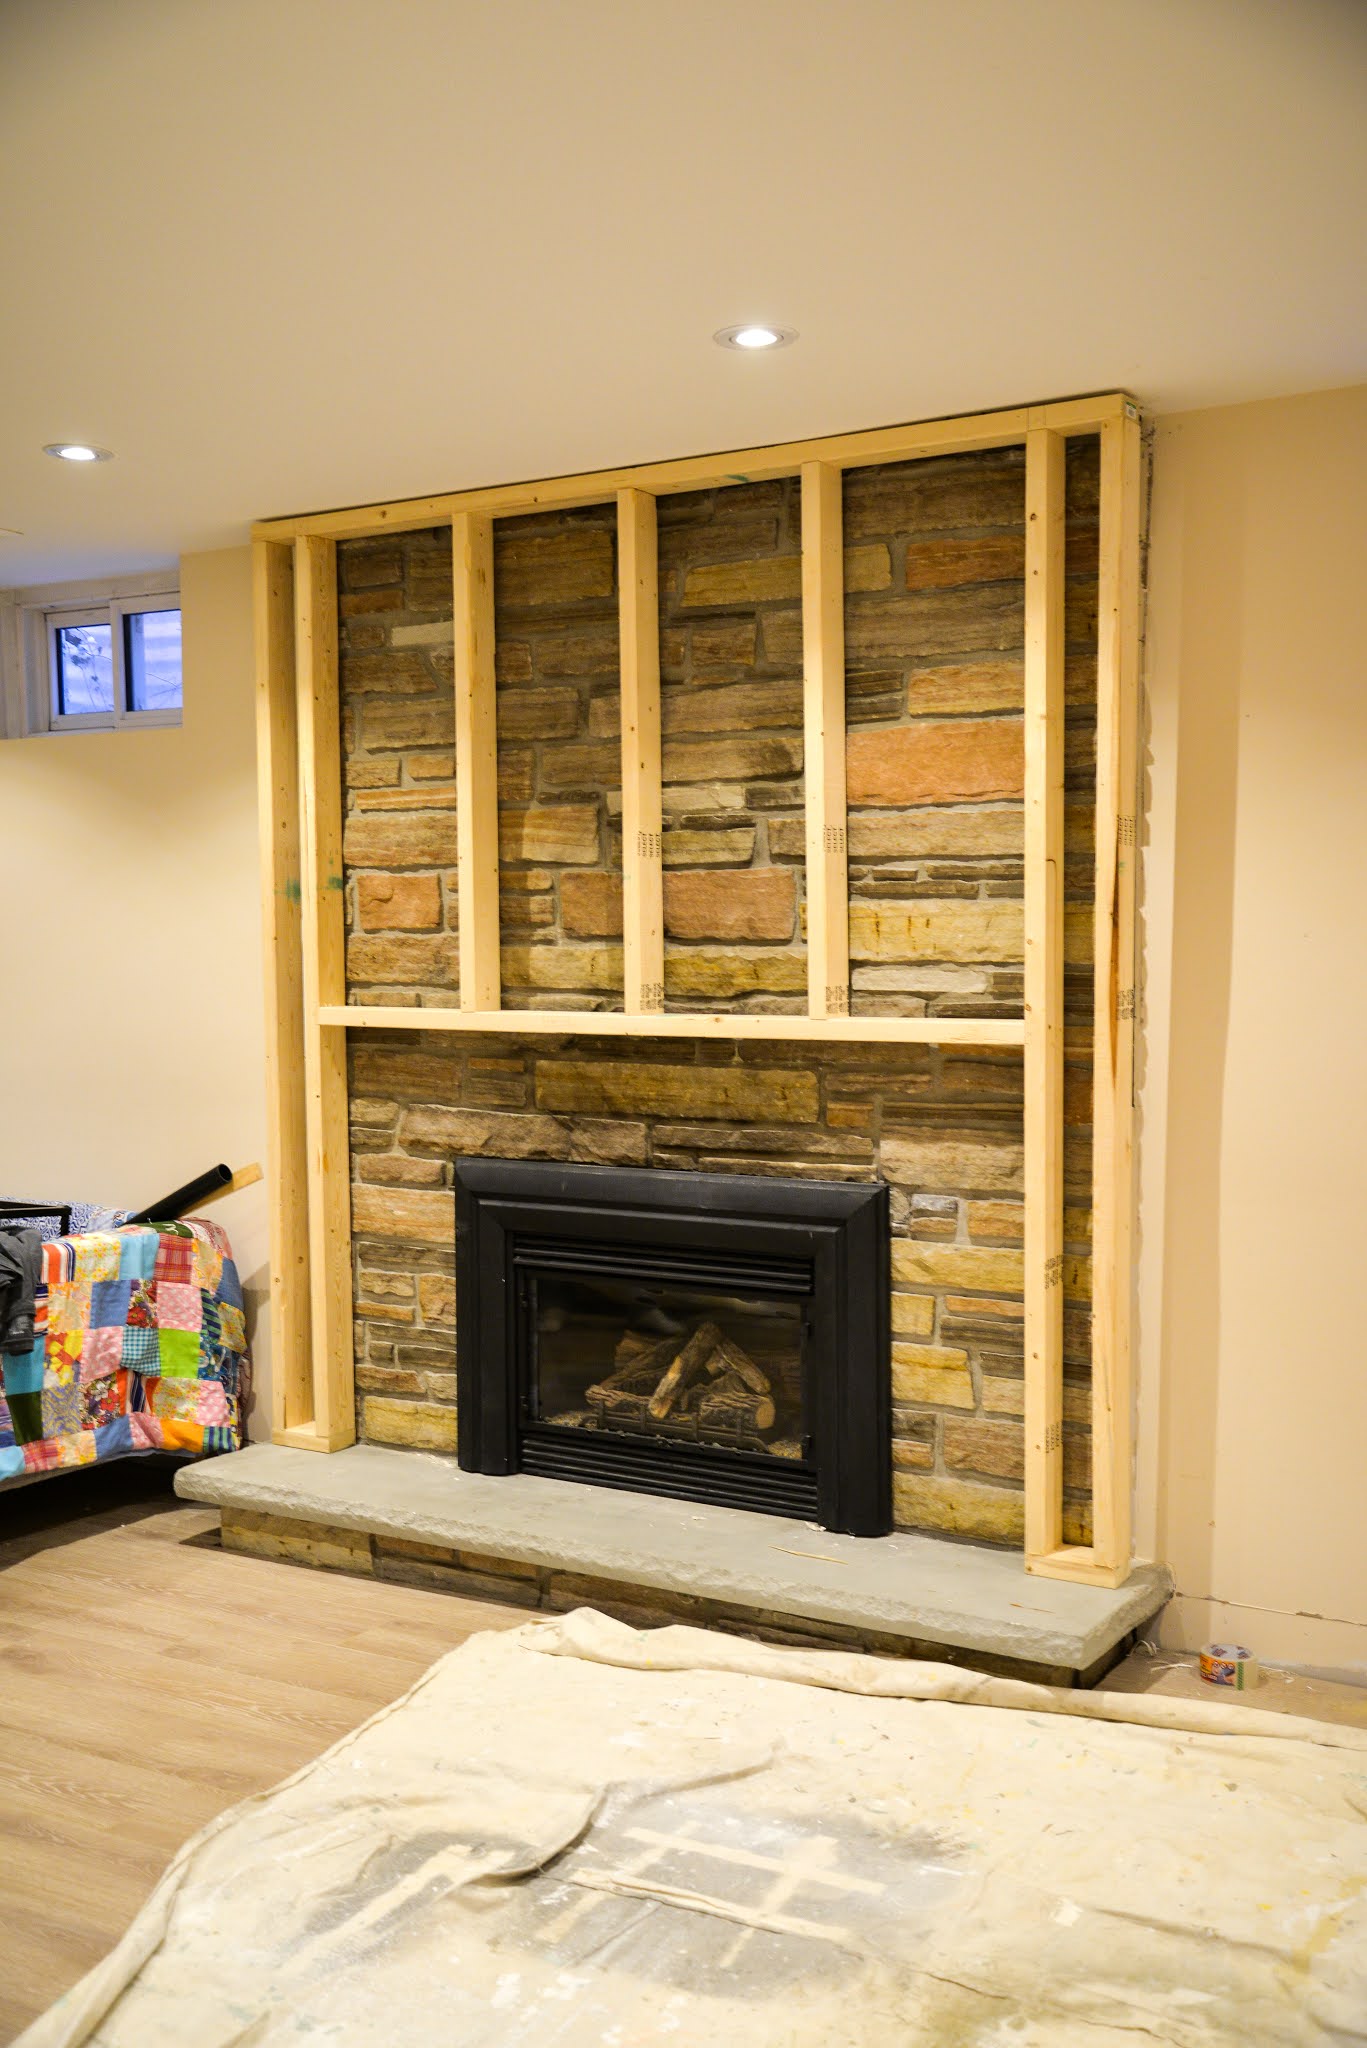 How To Update A Stone Fireplace, Faux Stone Fireplace Remodel